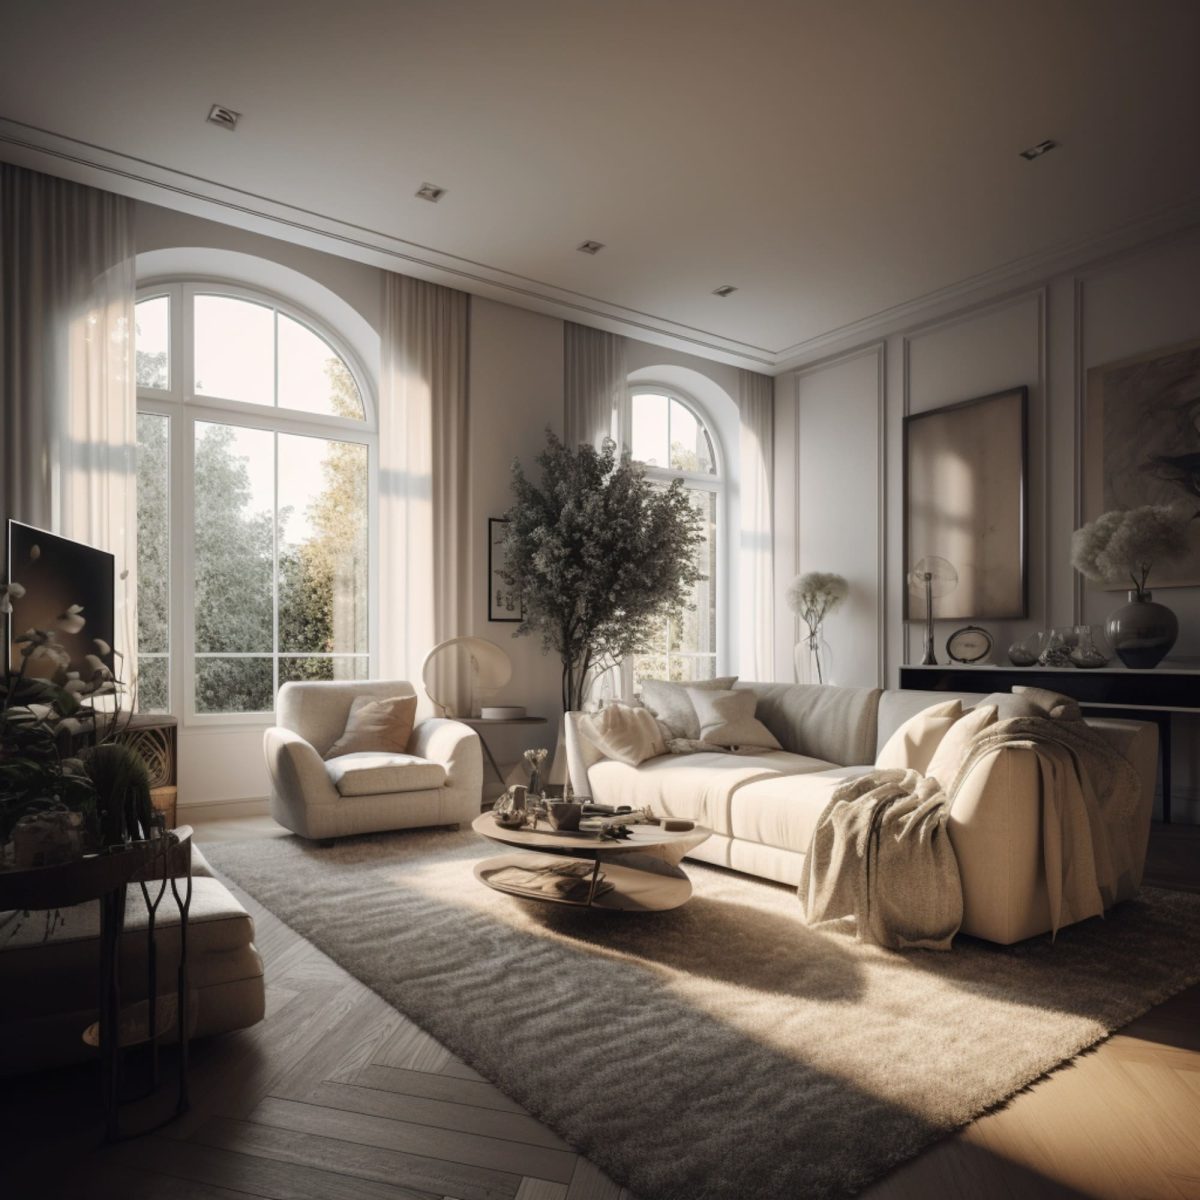 Quiet Luxury Living Room With Beige Couch, Large Windows and Plants